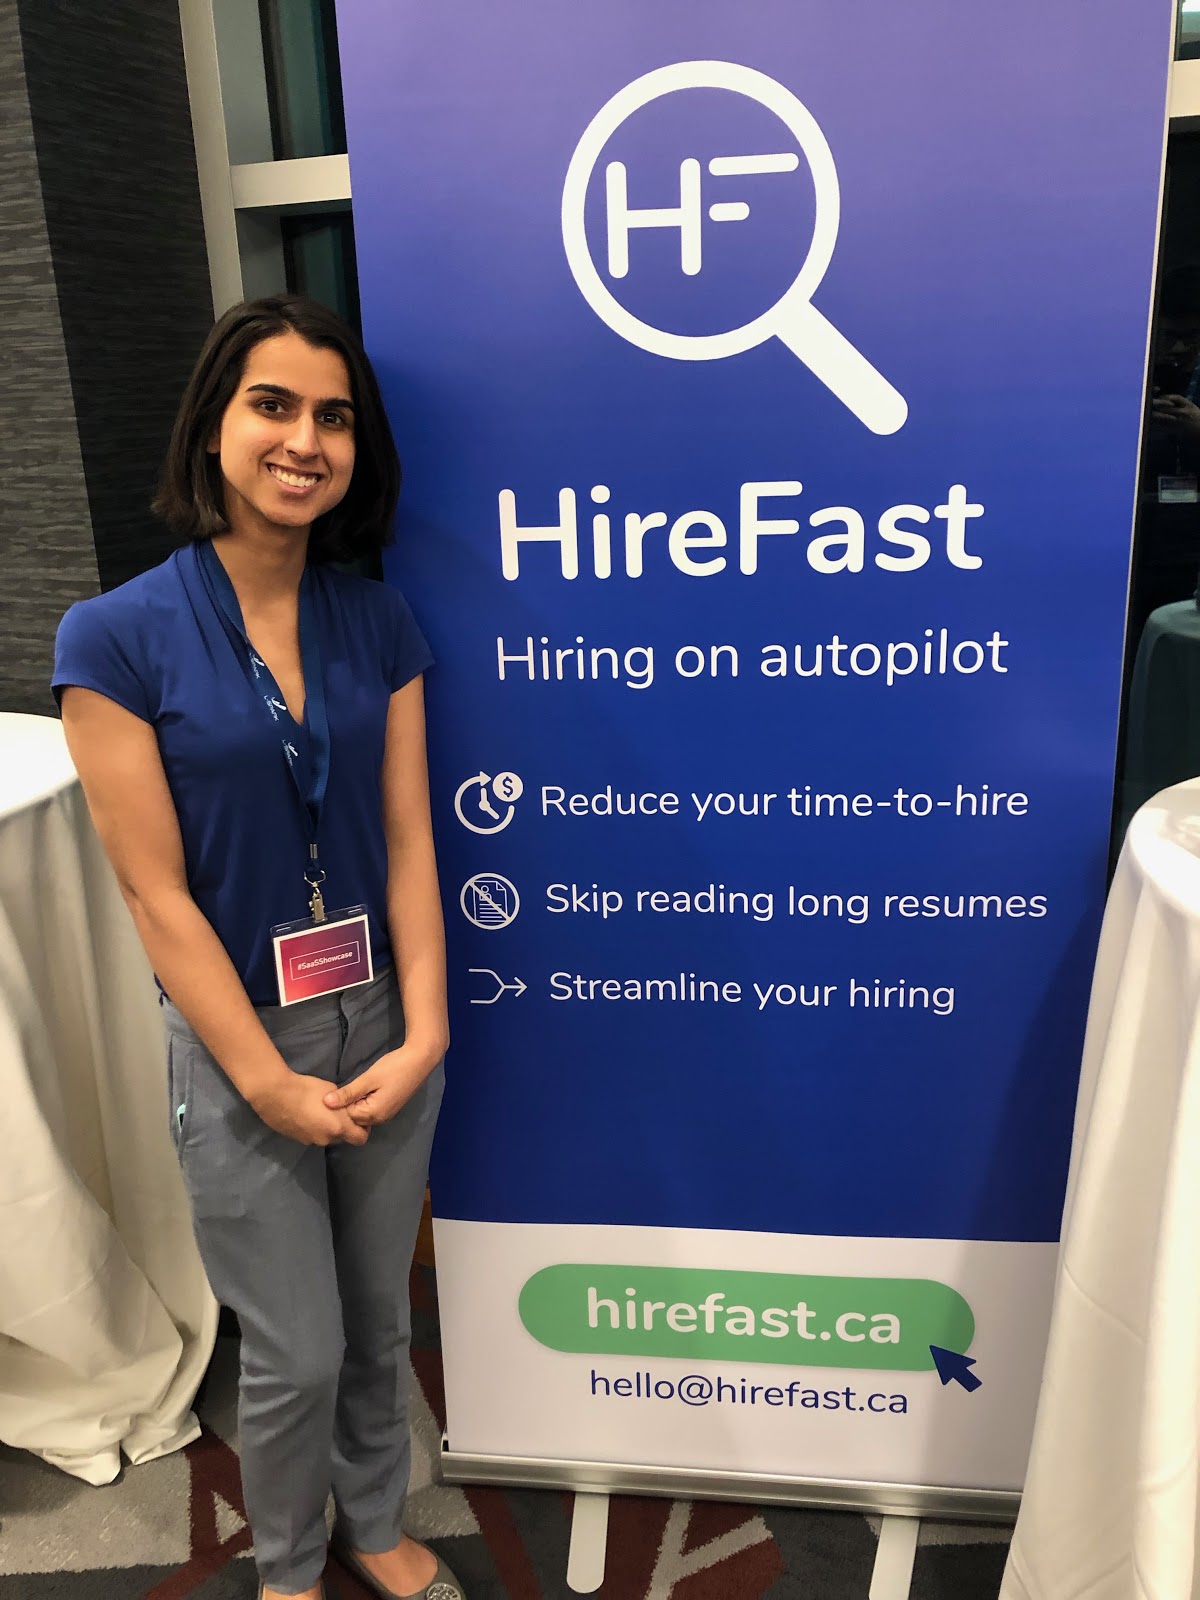 Co-founder of HireFast